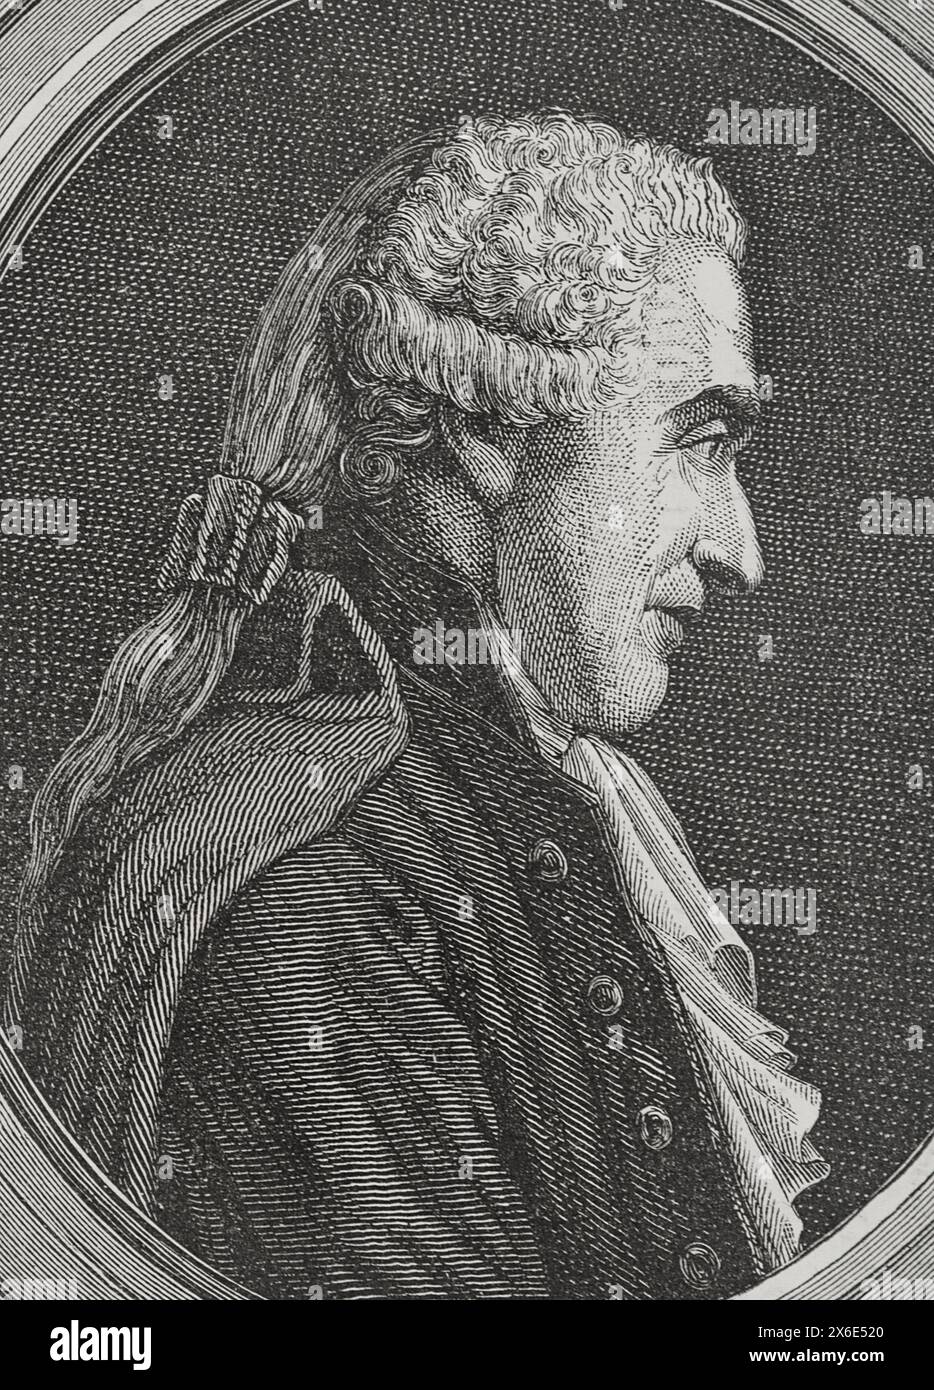 François Denis Tronchet (1726-1806). French jurist. He was one of the lawyers who defended King Louis XVI (1754-1793) during his judgment. He participated in the writing of the French civil code. Portrait. Engraving. 'History of the French Revolution'. Volume I, 1876. Stock Photo